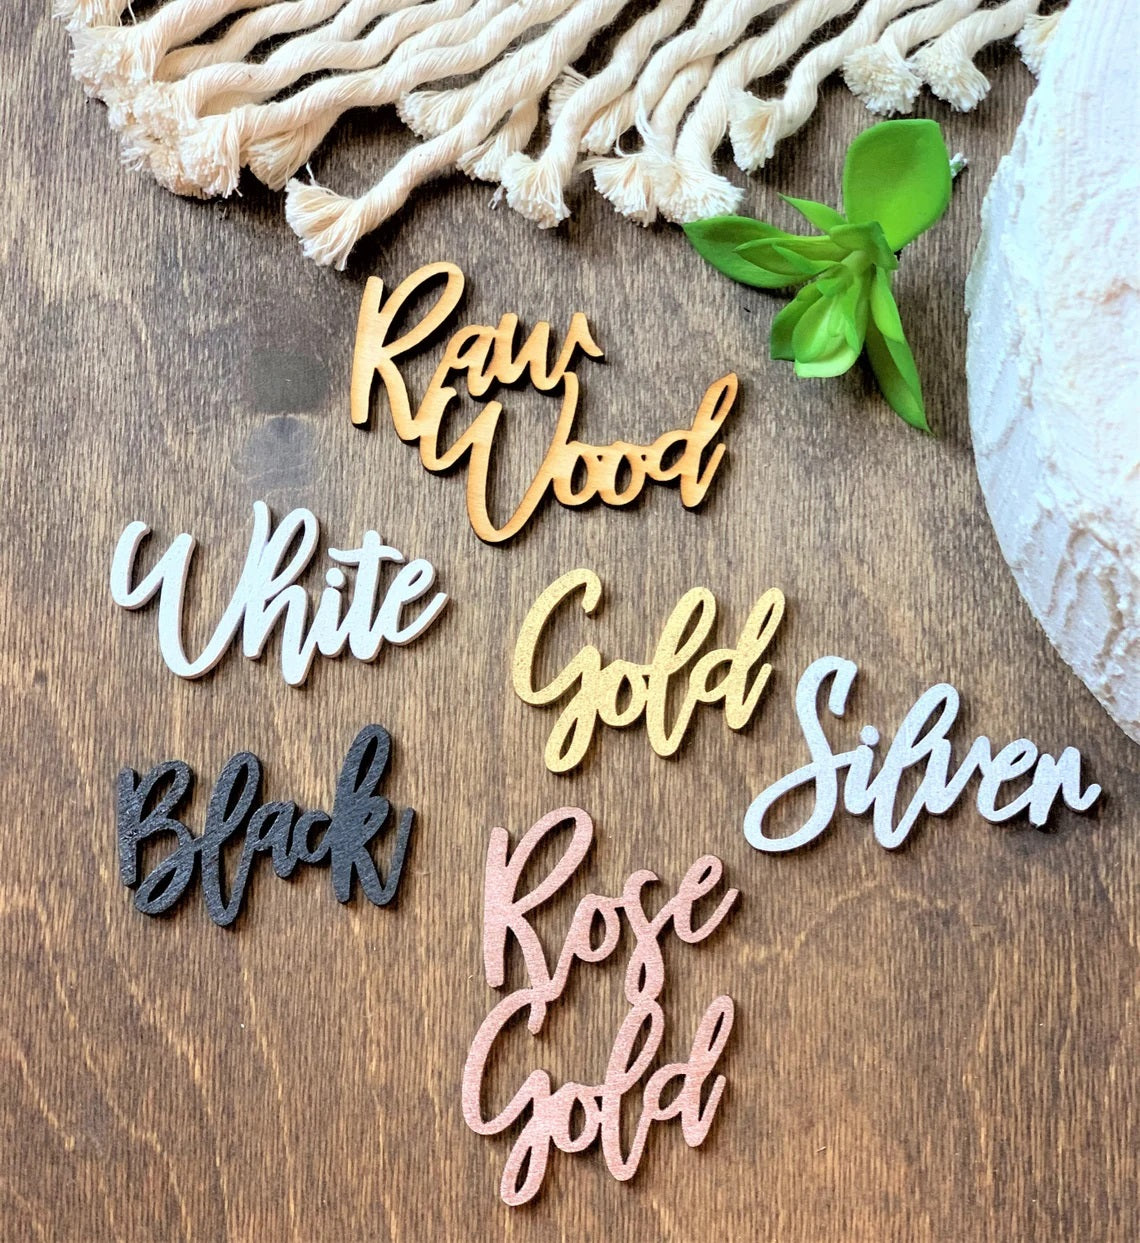 You're Our Greatest Adventure Baby Shower Custom Natural Wood Cake Topper